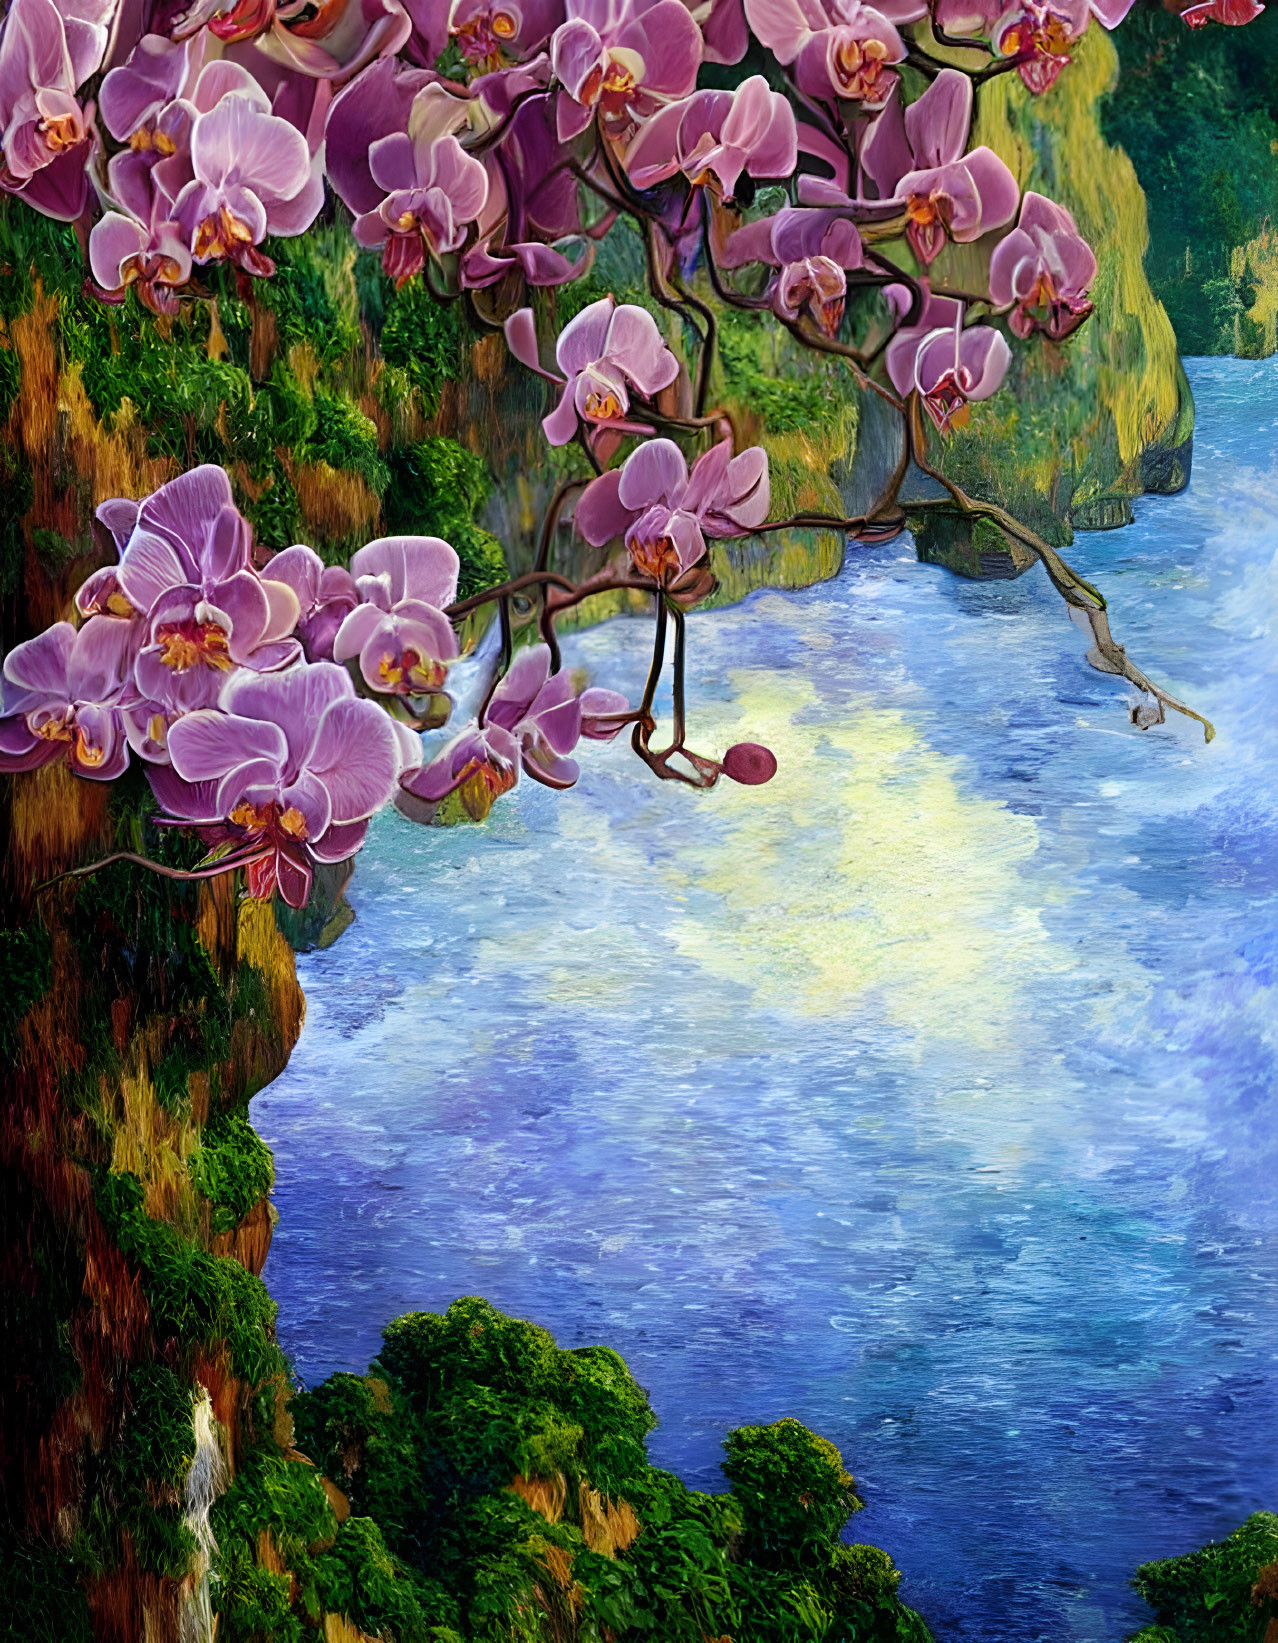 Pink Orchids Blooming Over Serene Water Body